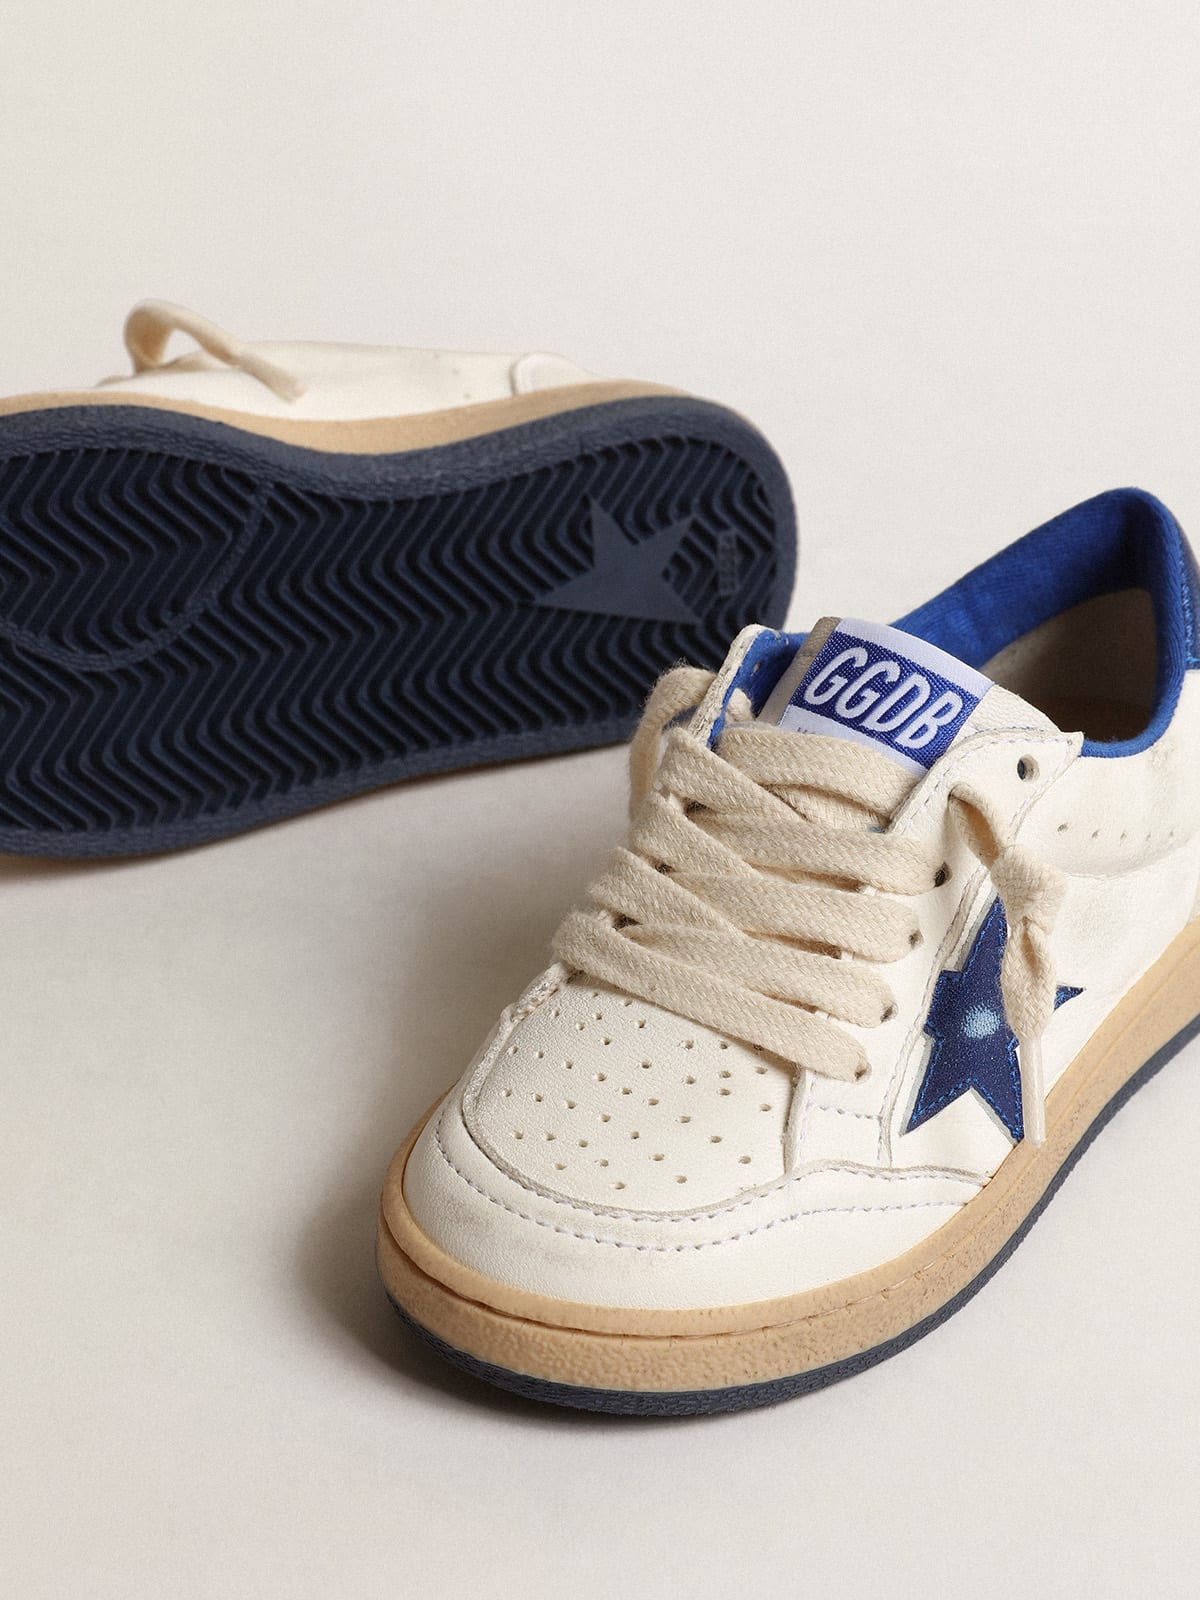 Golden Goose - Ball Star Junior with blue metallic leather star and heel tab in 